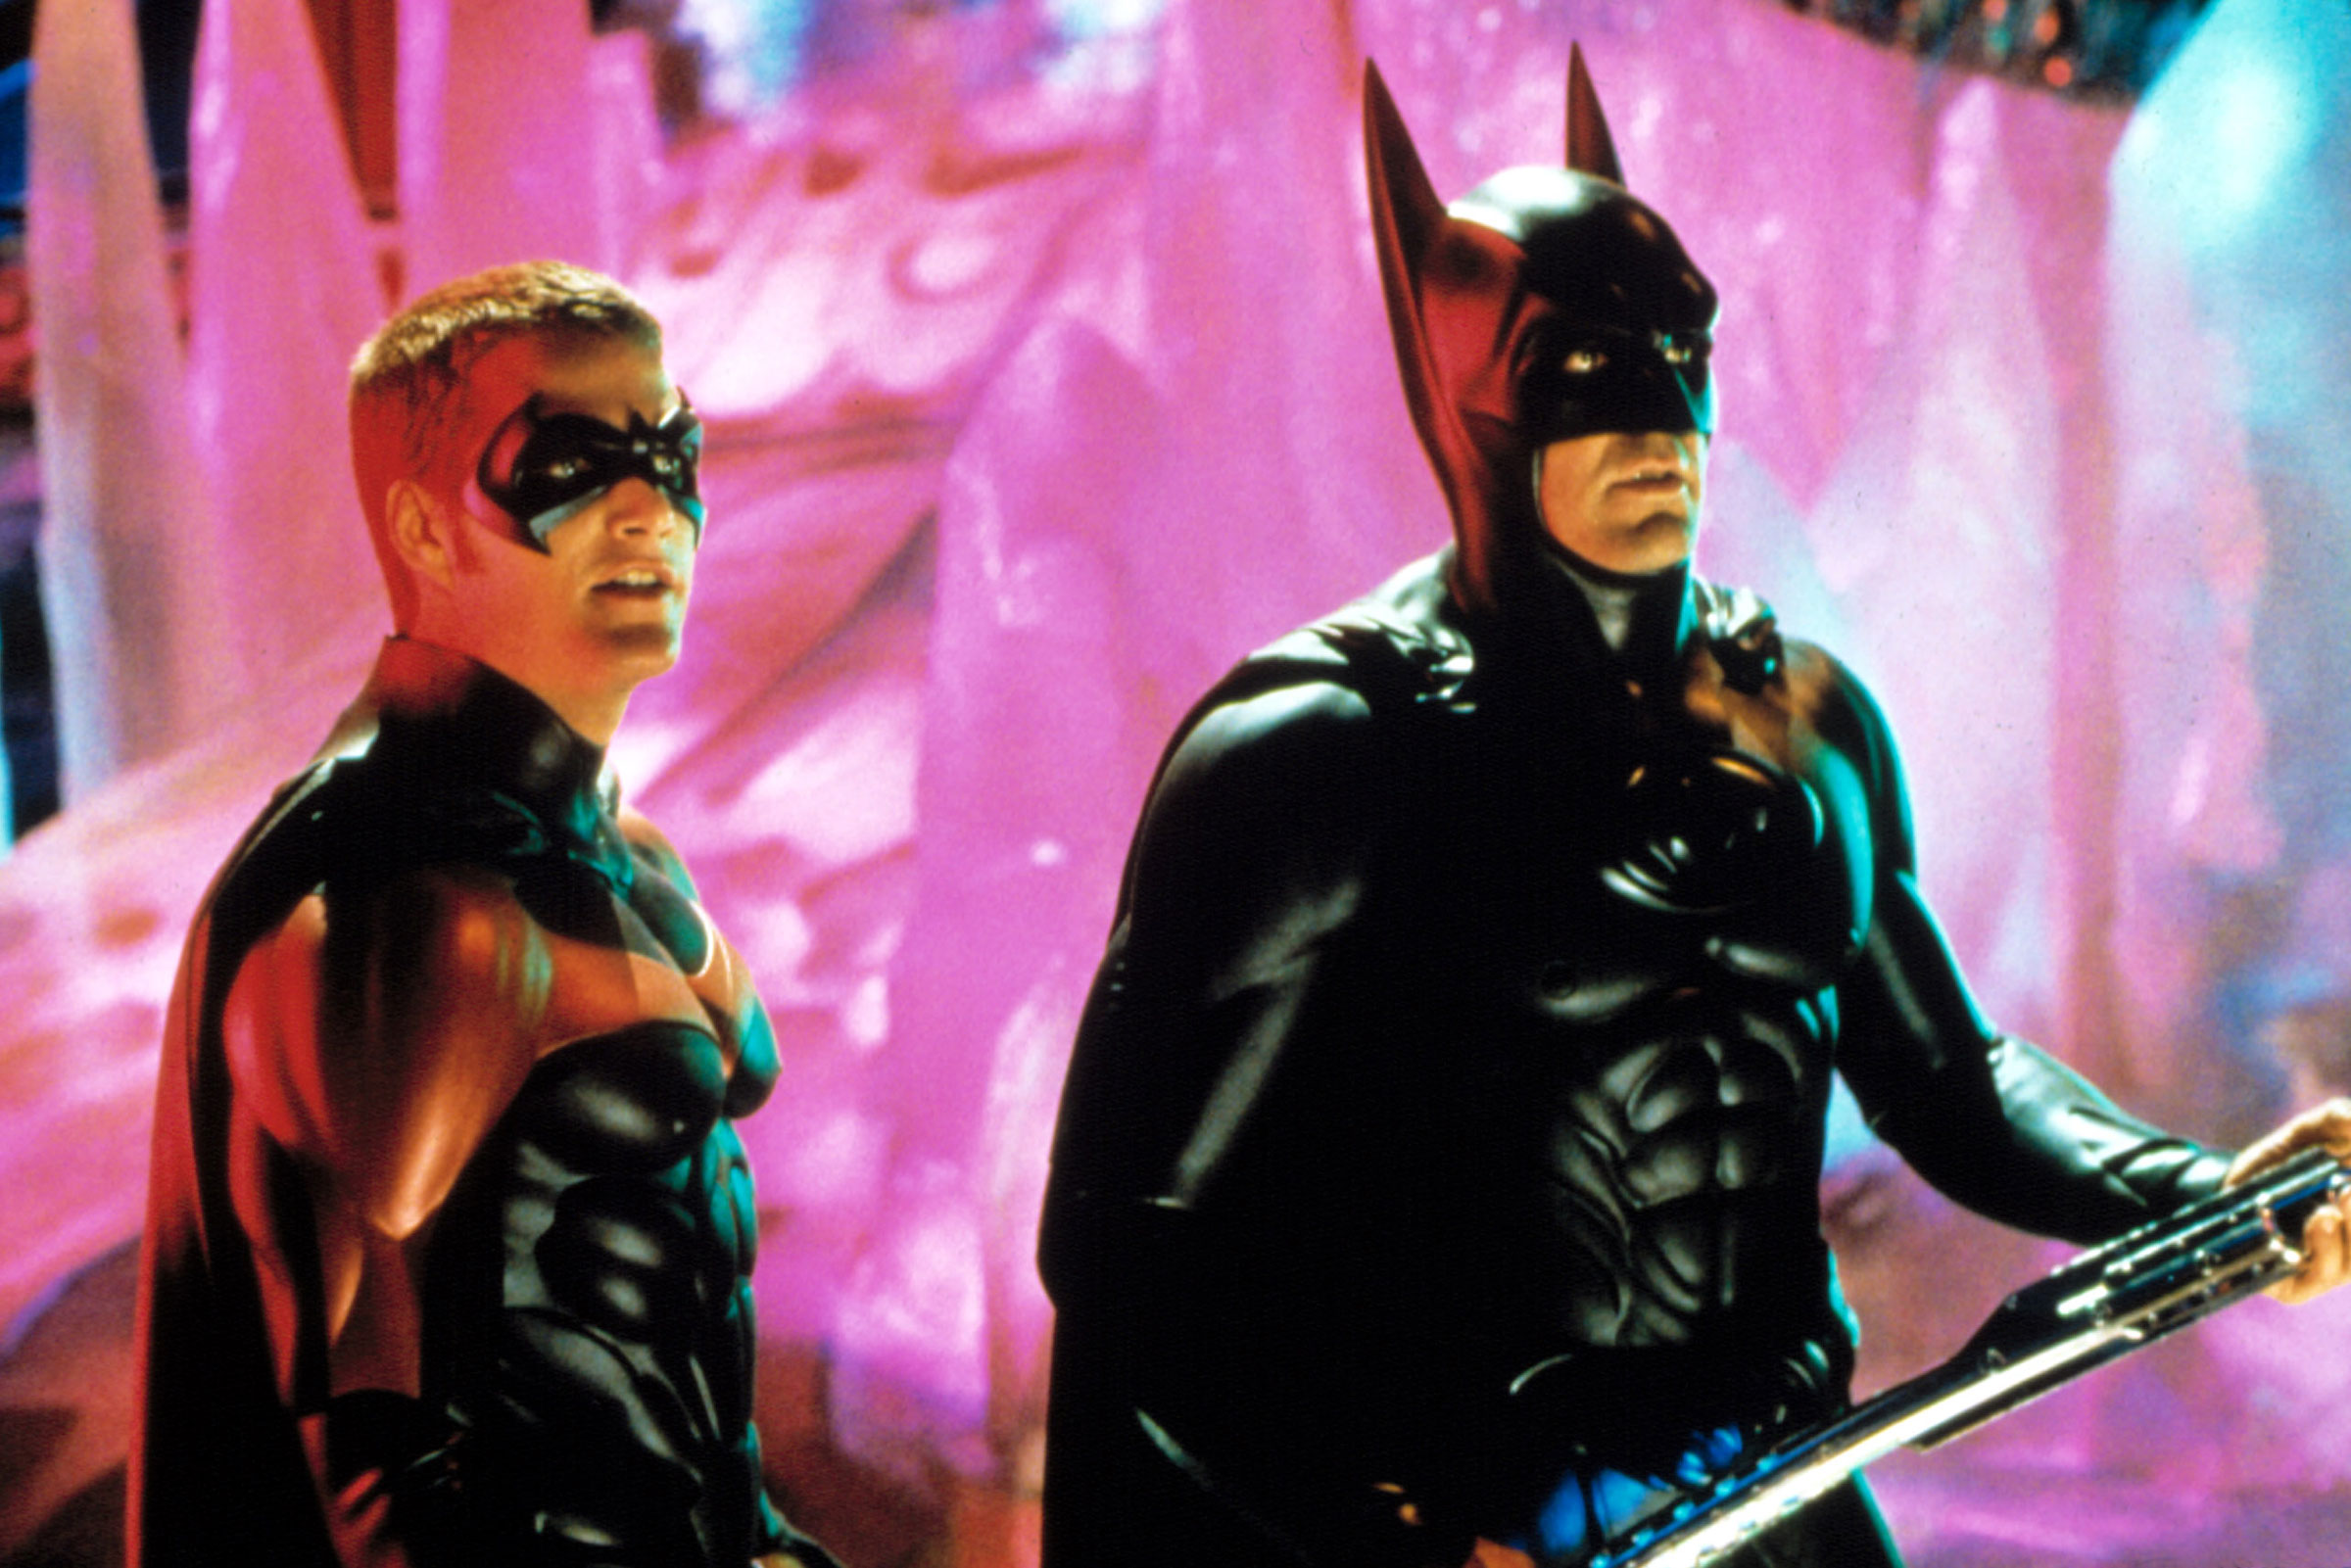 Chris O'Donnell as Robin and George Clooney as Batman in <em>Batman and Robin</em> (Warner Bros/Courtesy Everett Collection)